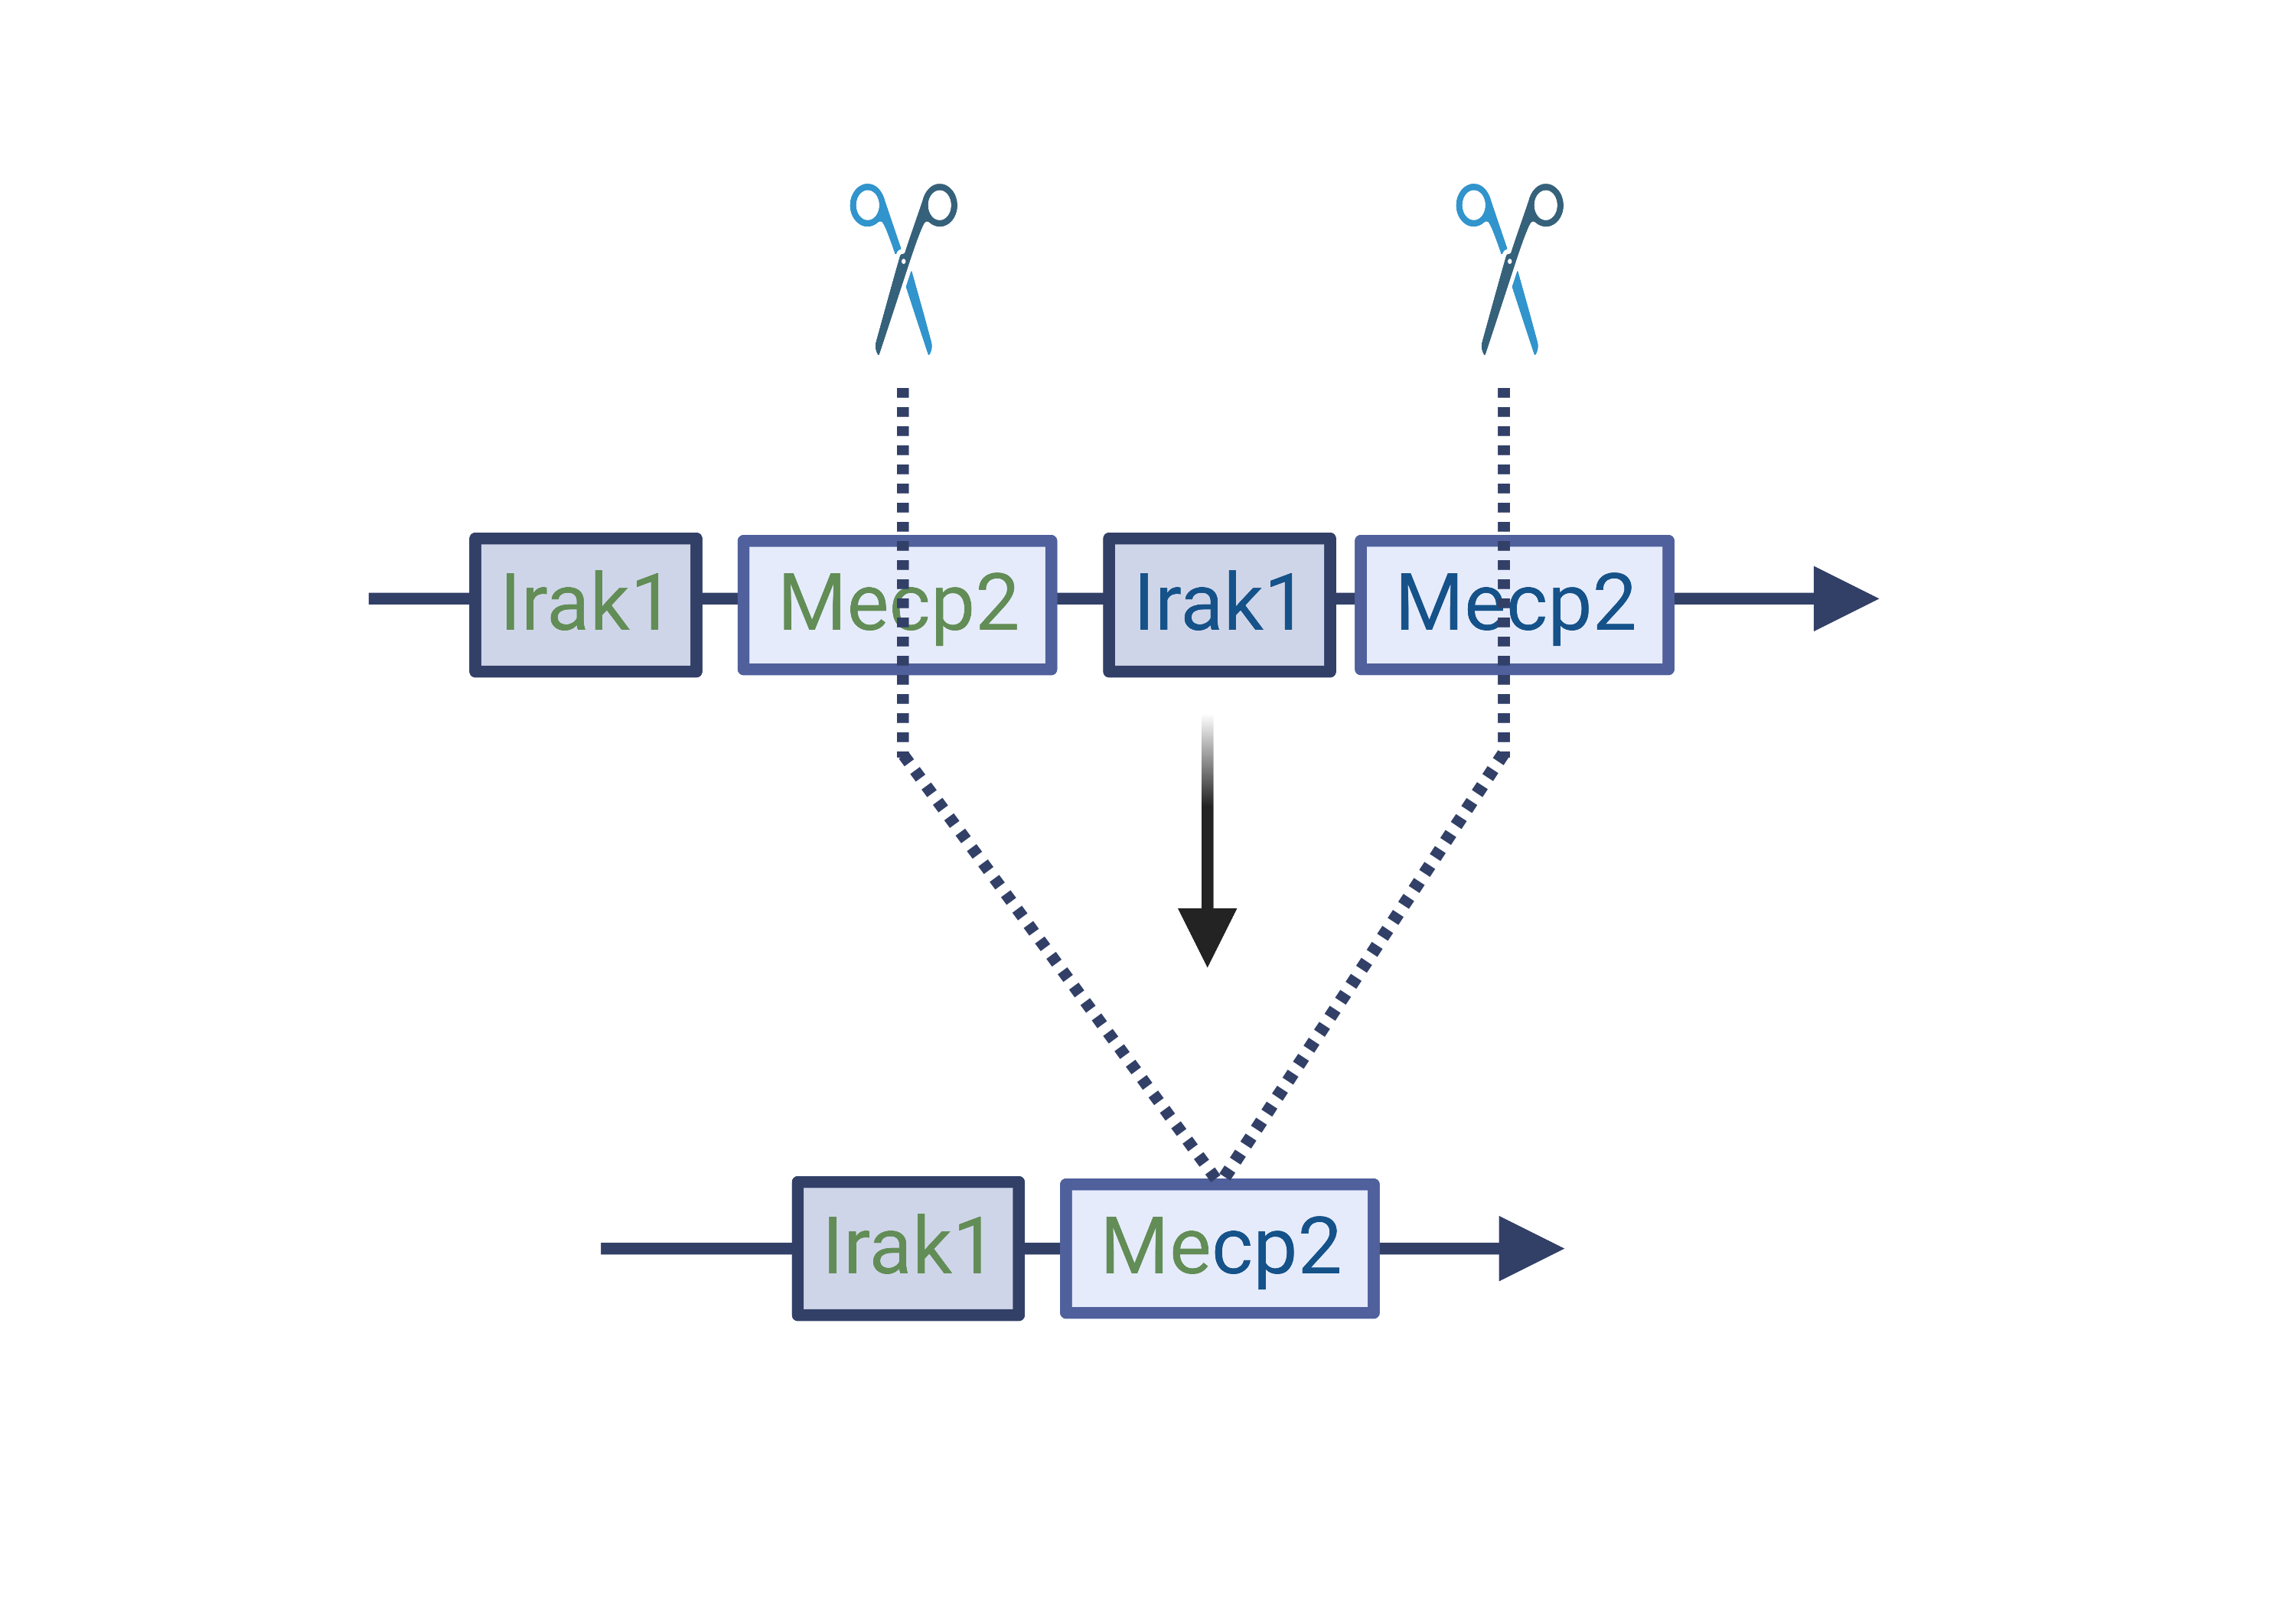 Schematic showing a gene duplication (Mecp2 and Irak1) removal by CRISPR editing